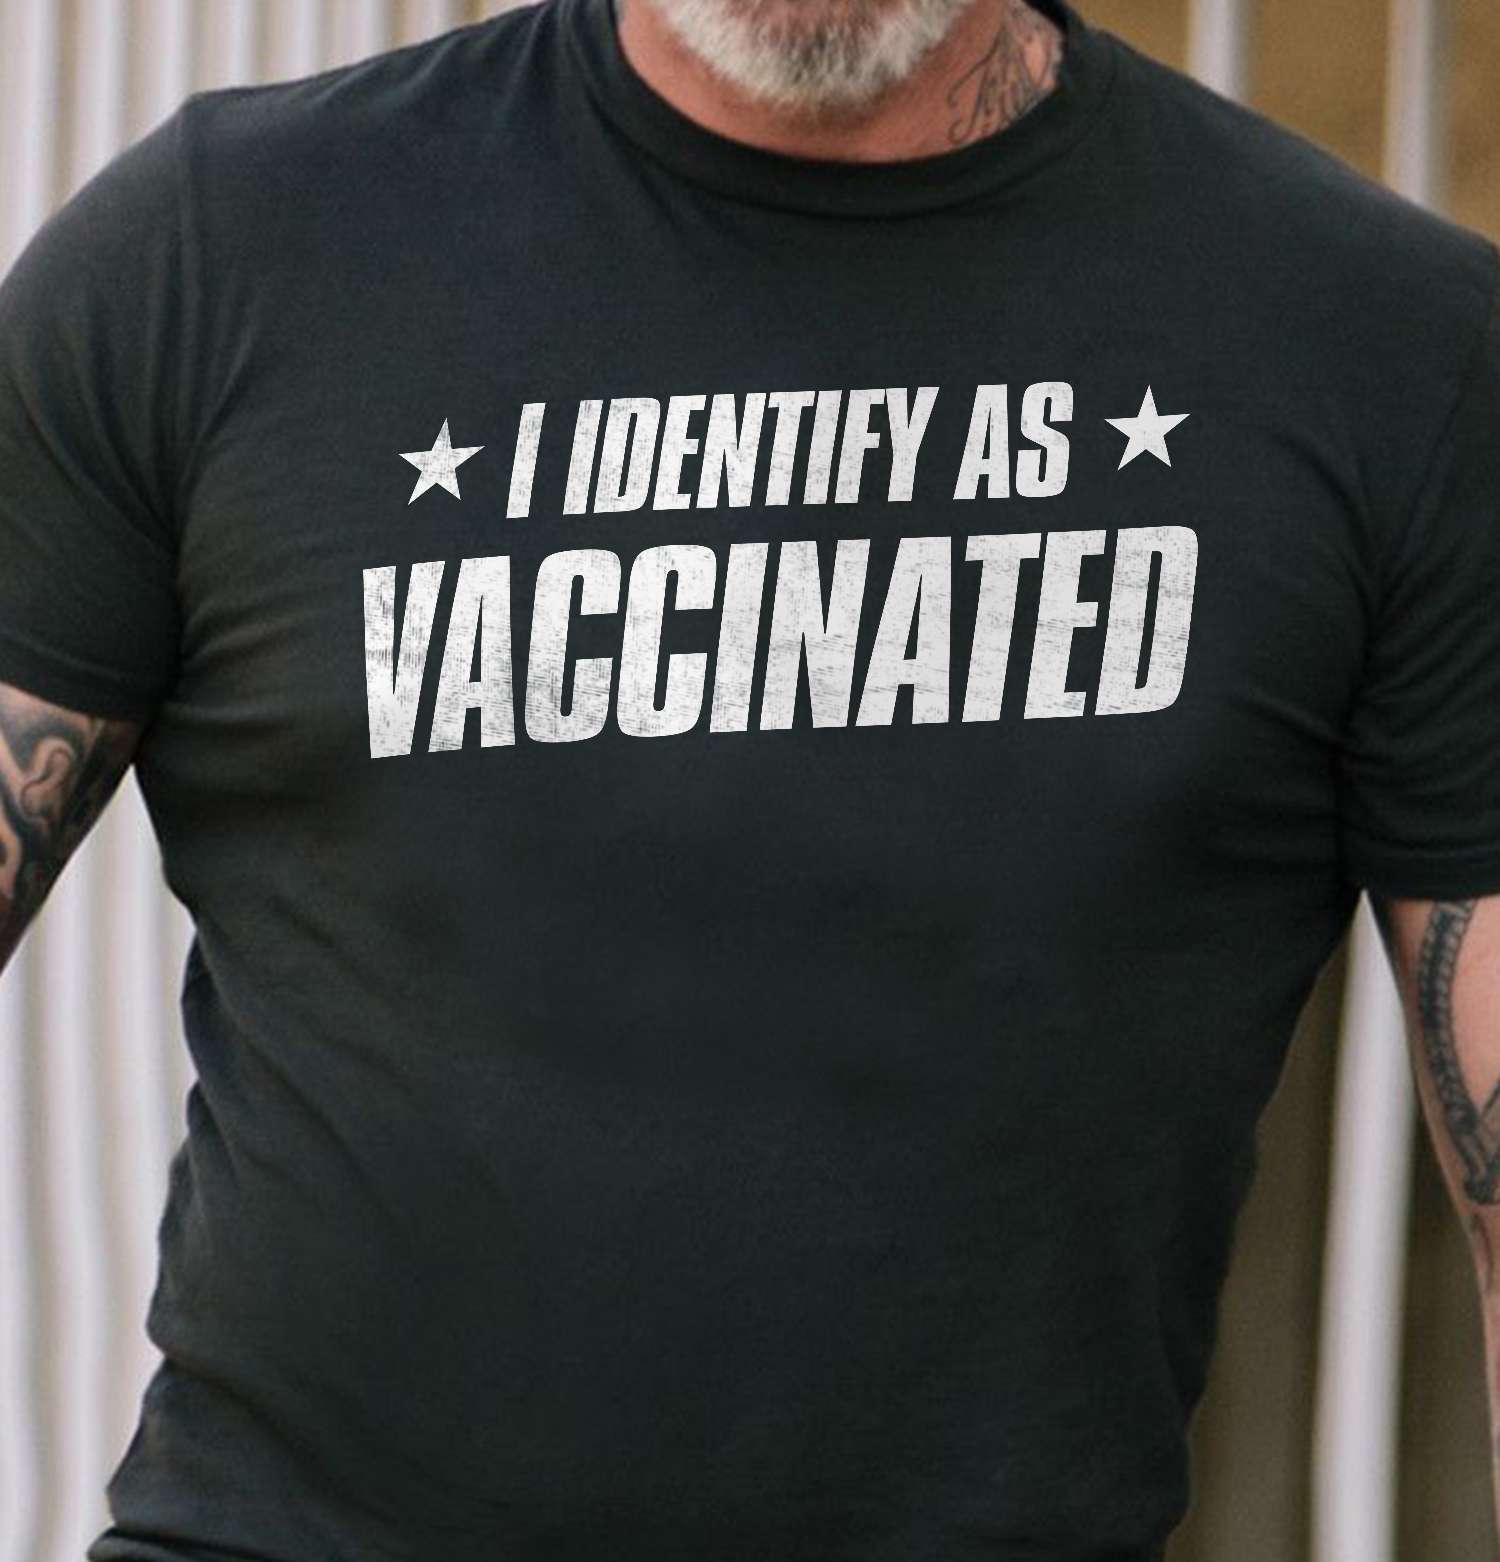 I identify as vaccinated